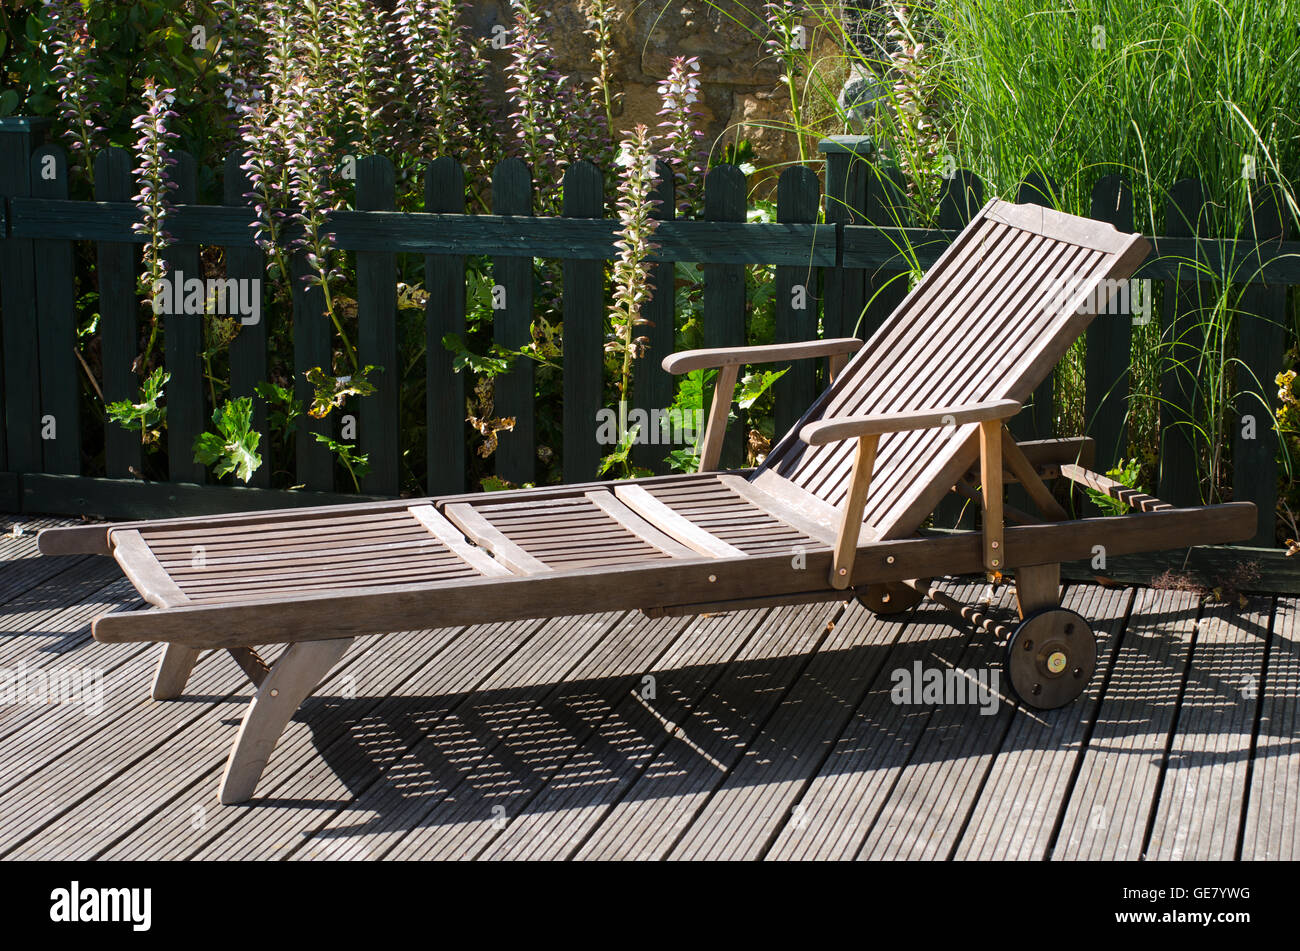 Wooden sun lounger on a summers day Stock Photo